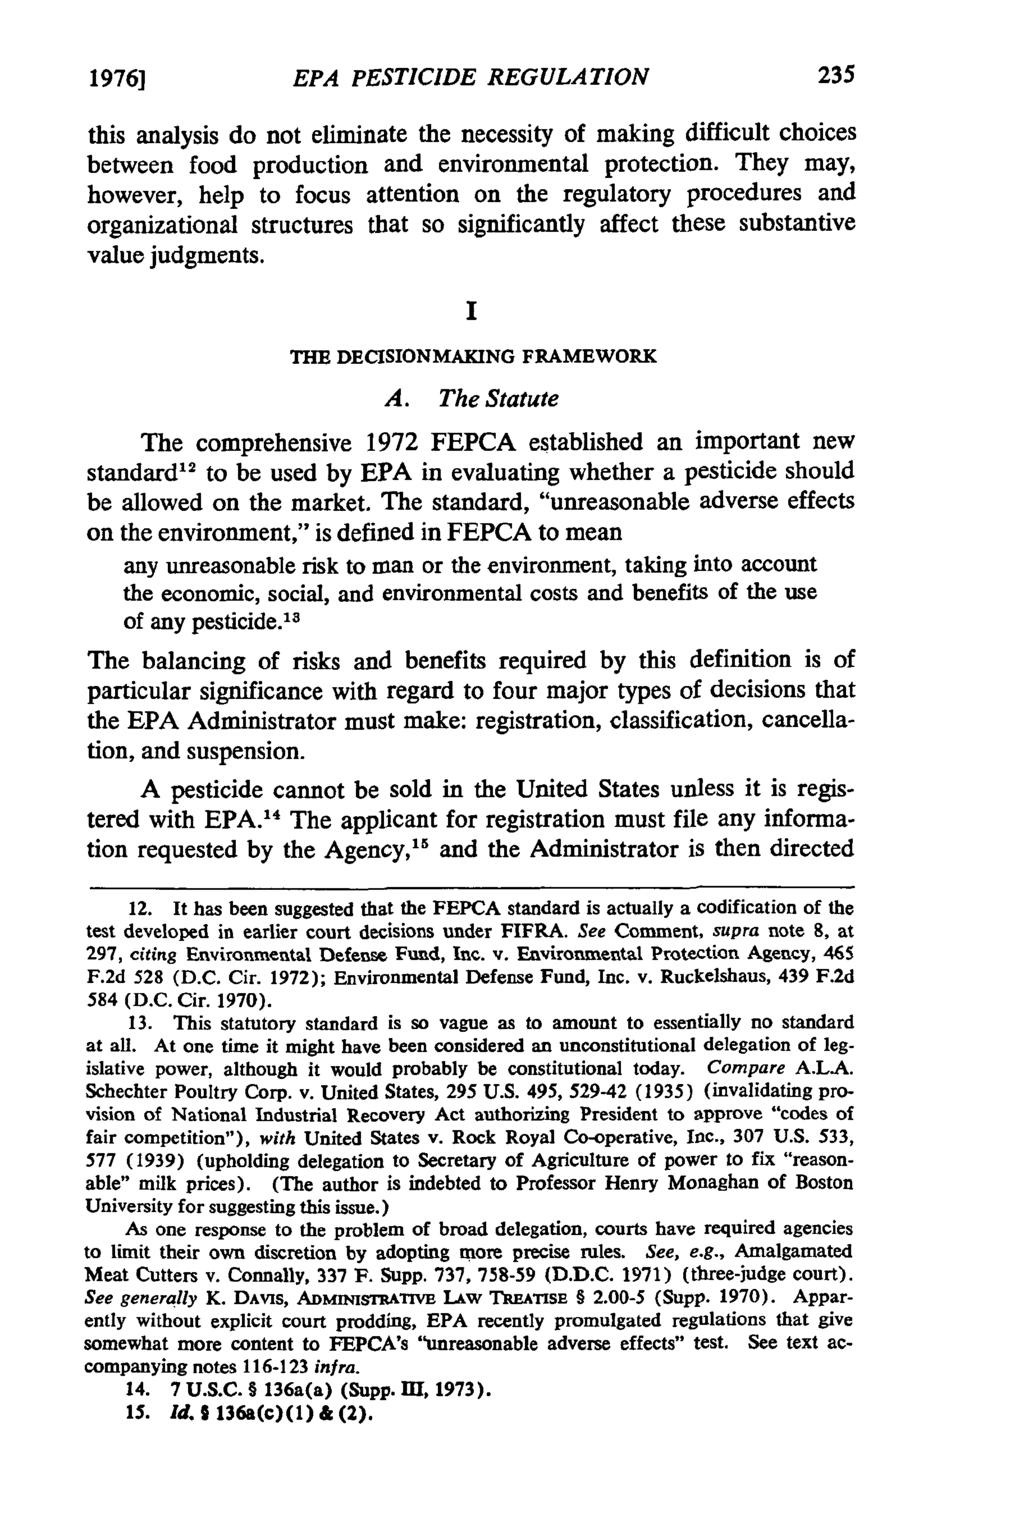 1976] EPA PESTICIDE REGULATION this analysis do not eliminate the necessity of making difficult choices between food production and environmental protection.